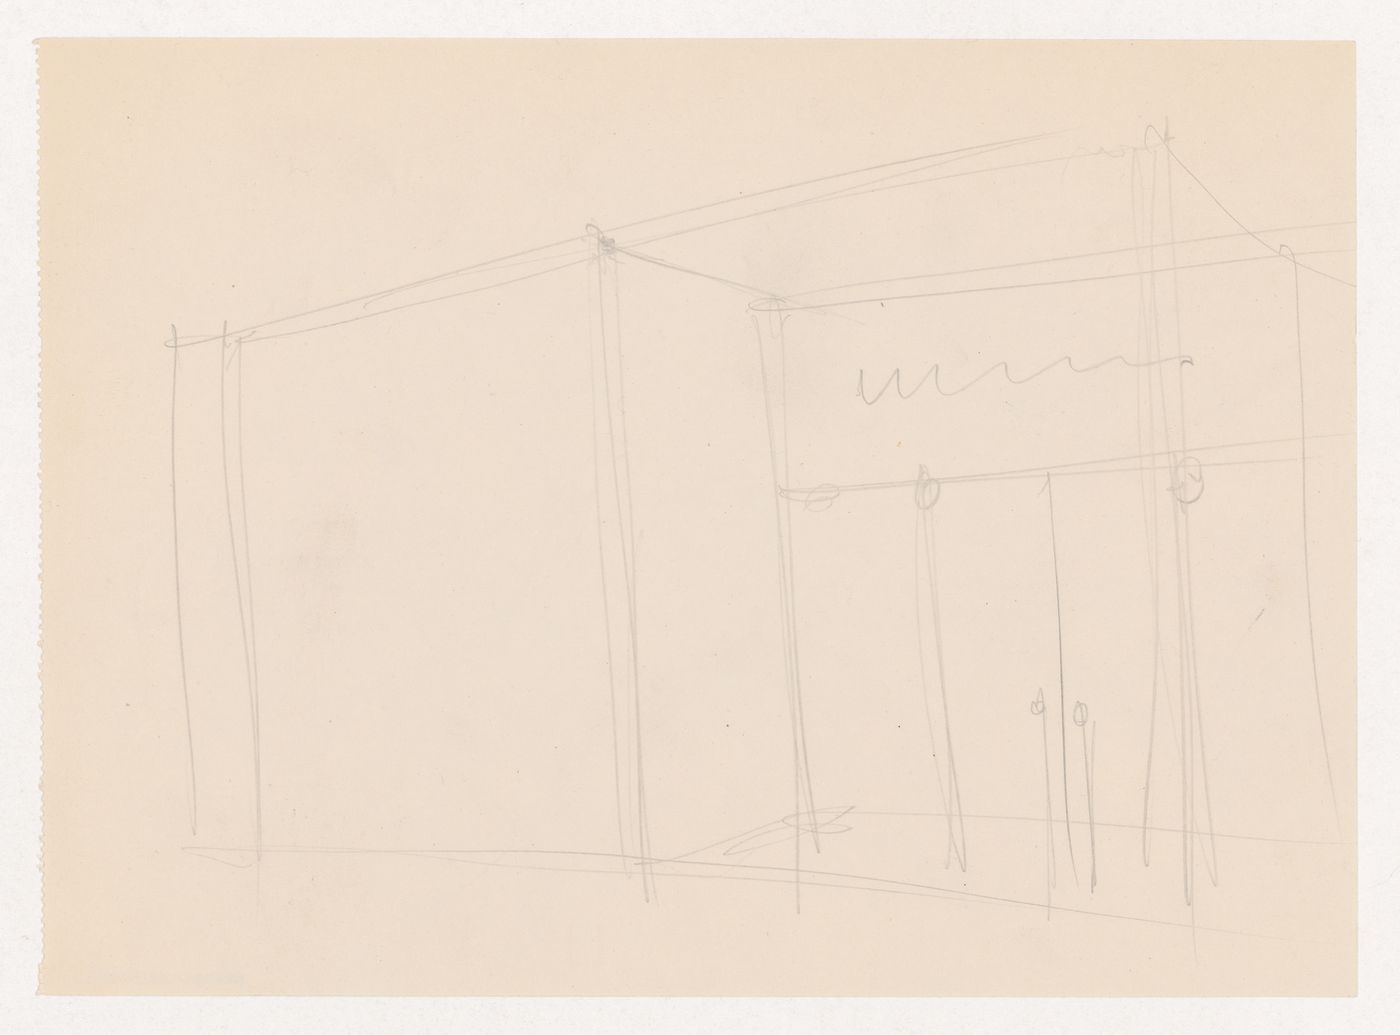 Perspective sketch for entrance for the Metallurgy Building, Illinois Institute of Technology, Chicago